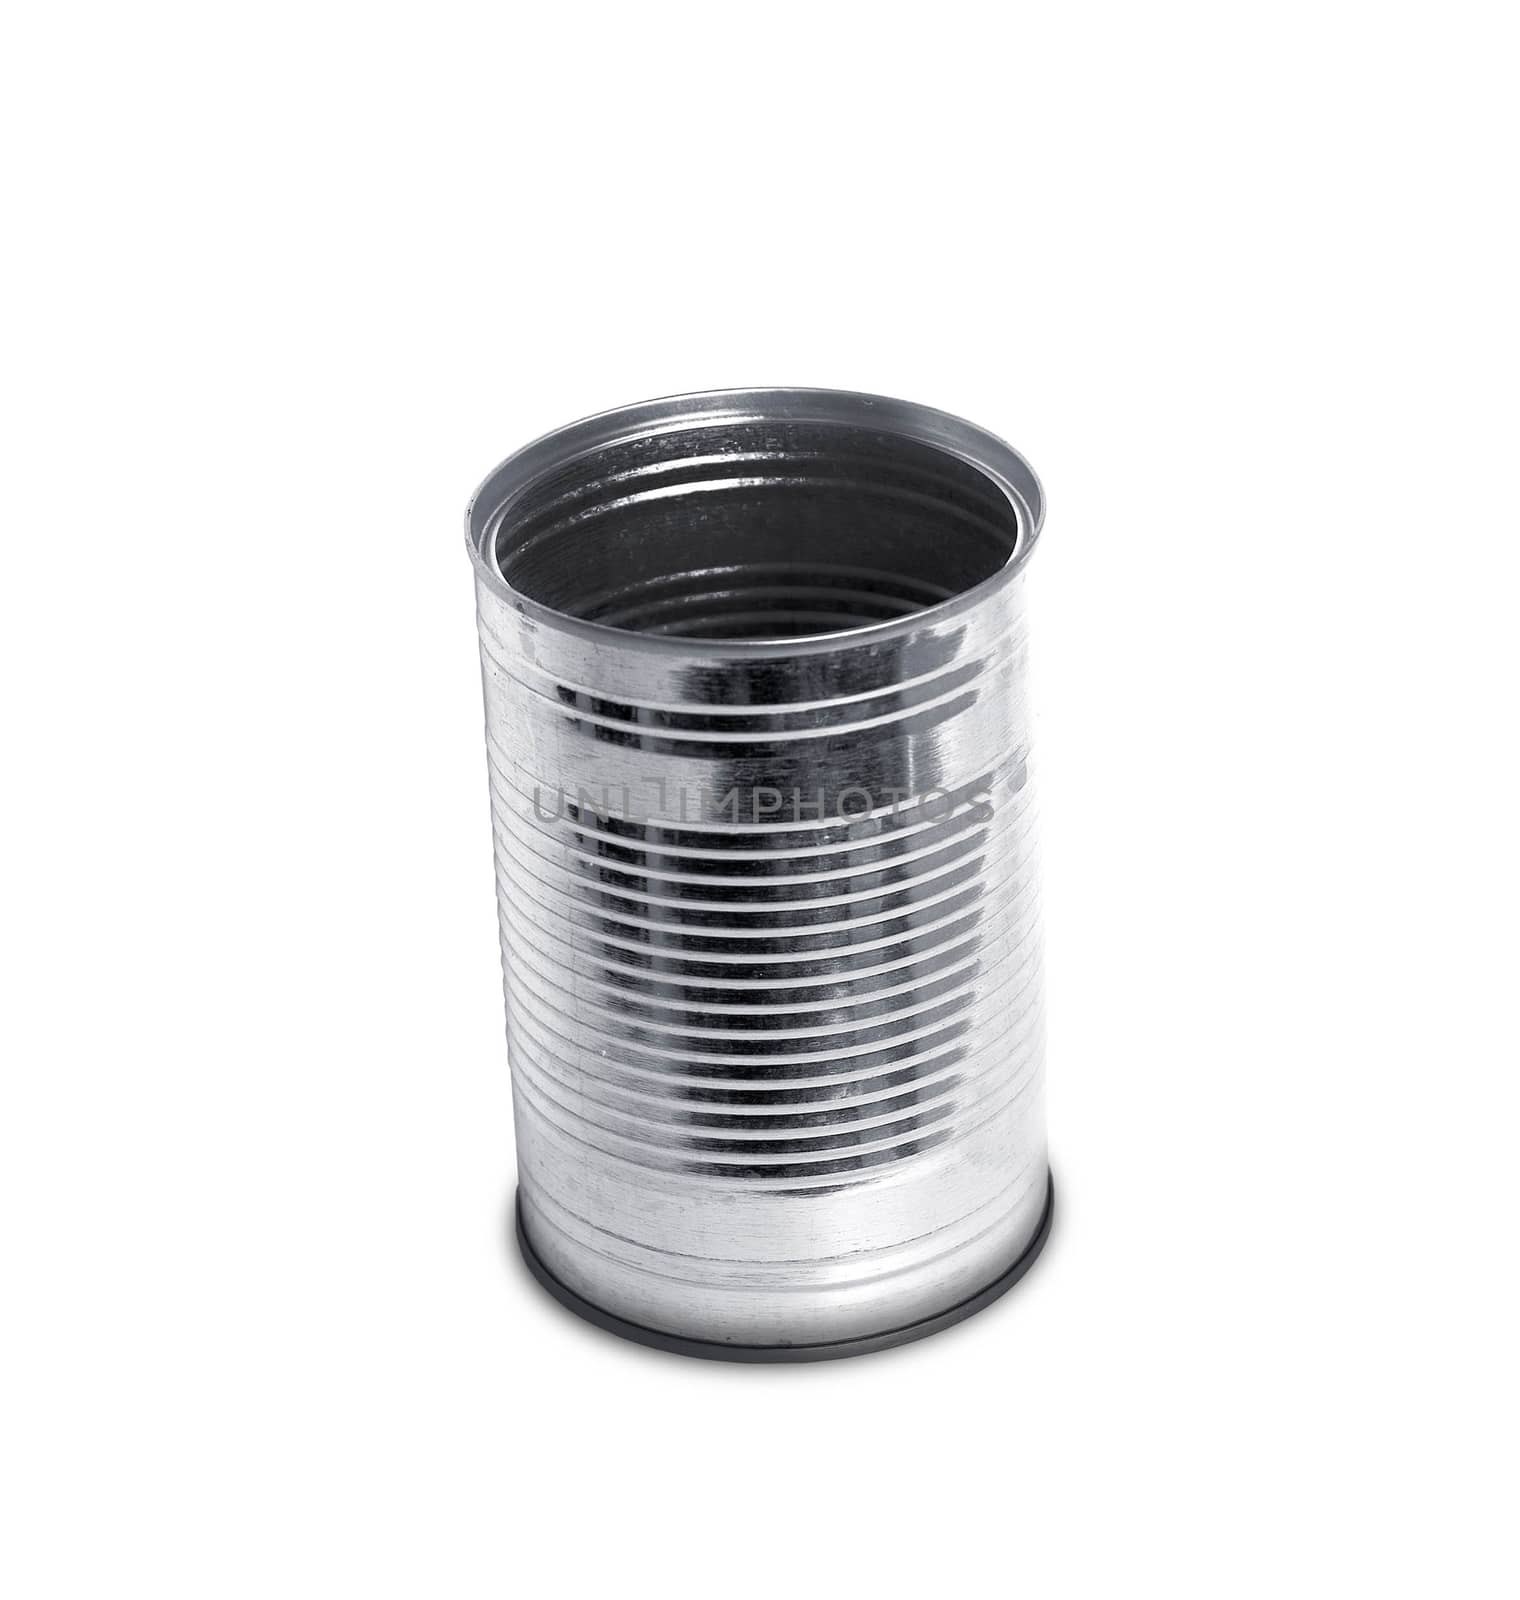 Empty open tin can without label isolated on white.